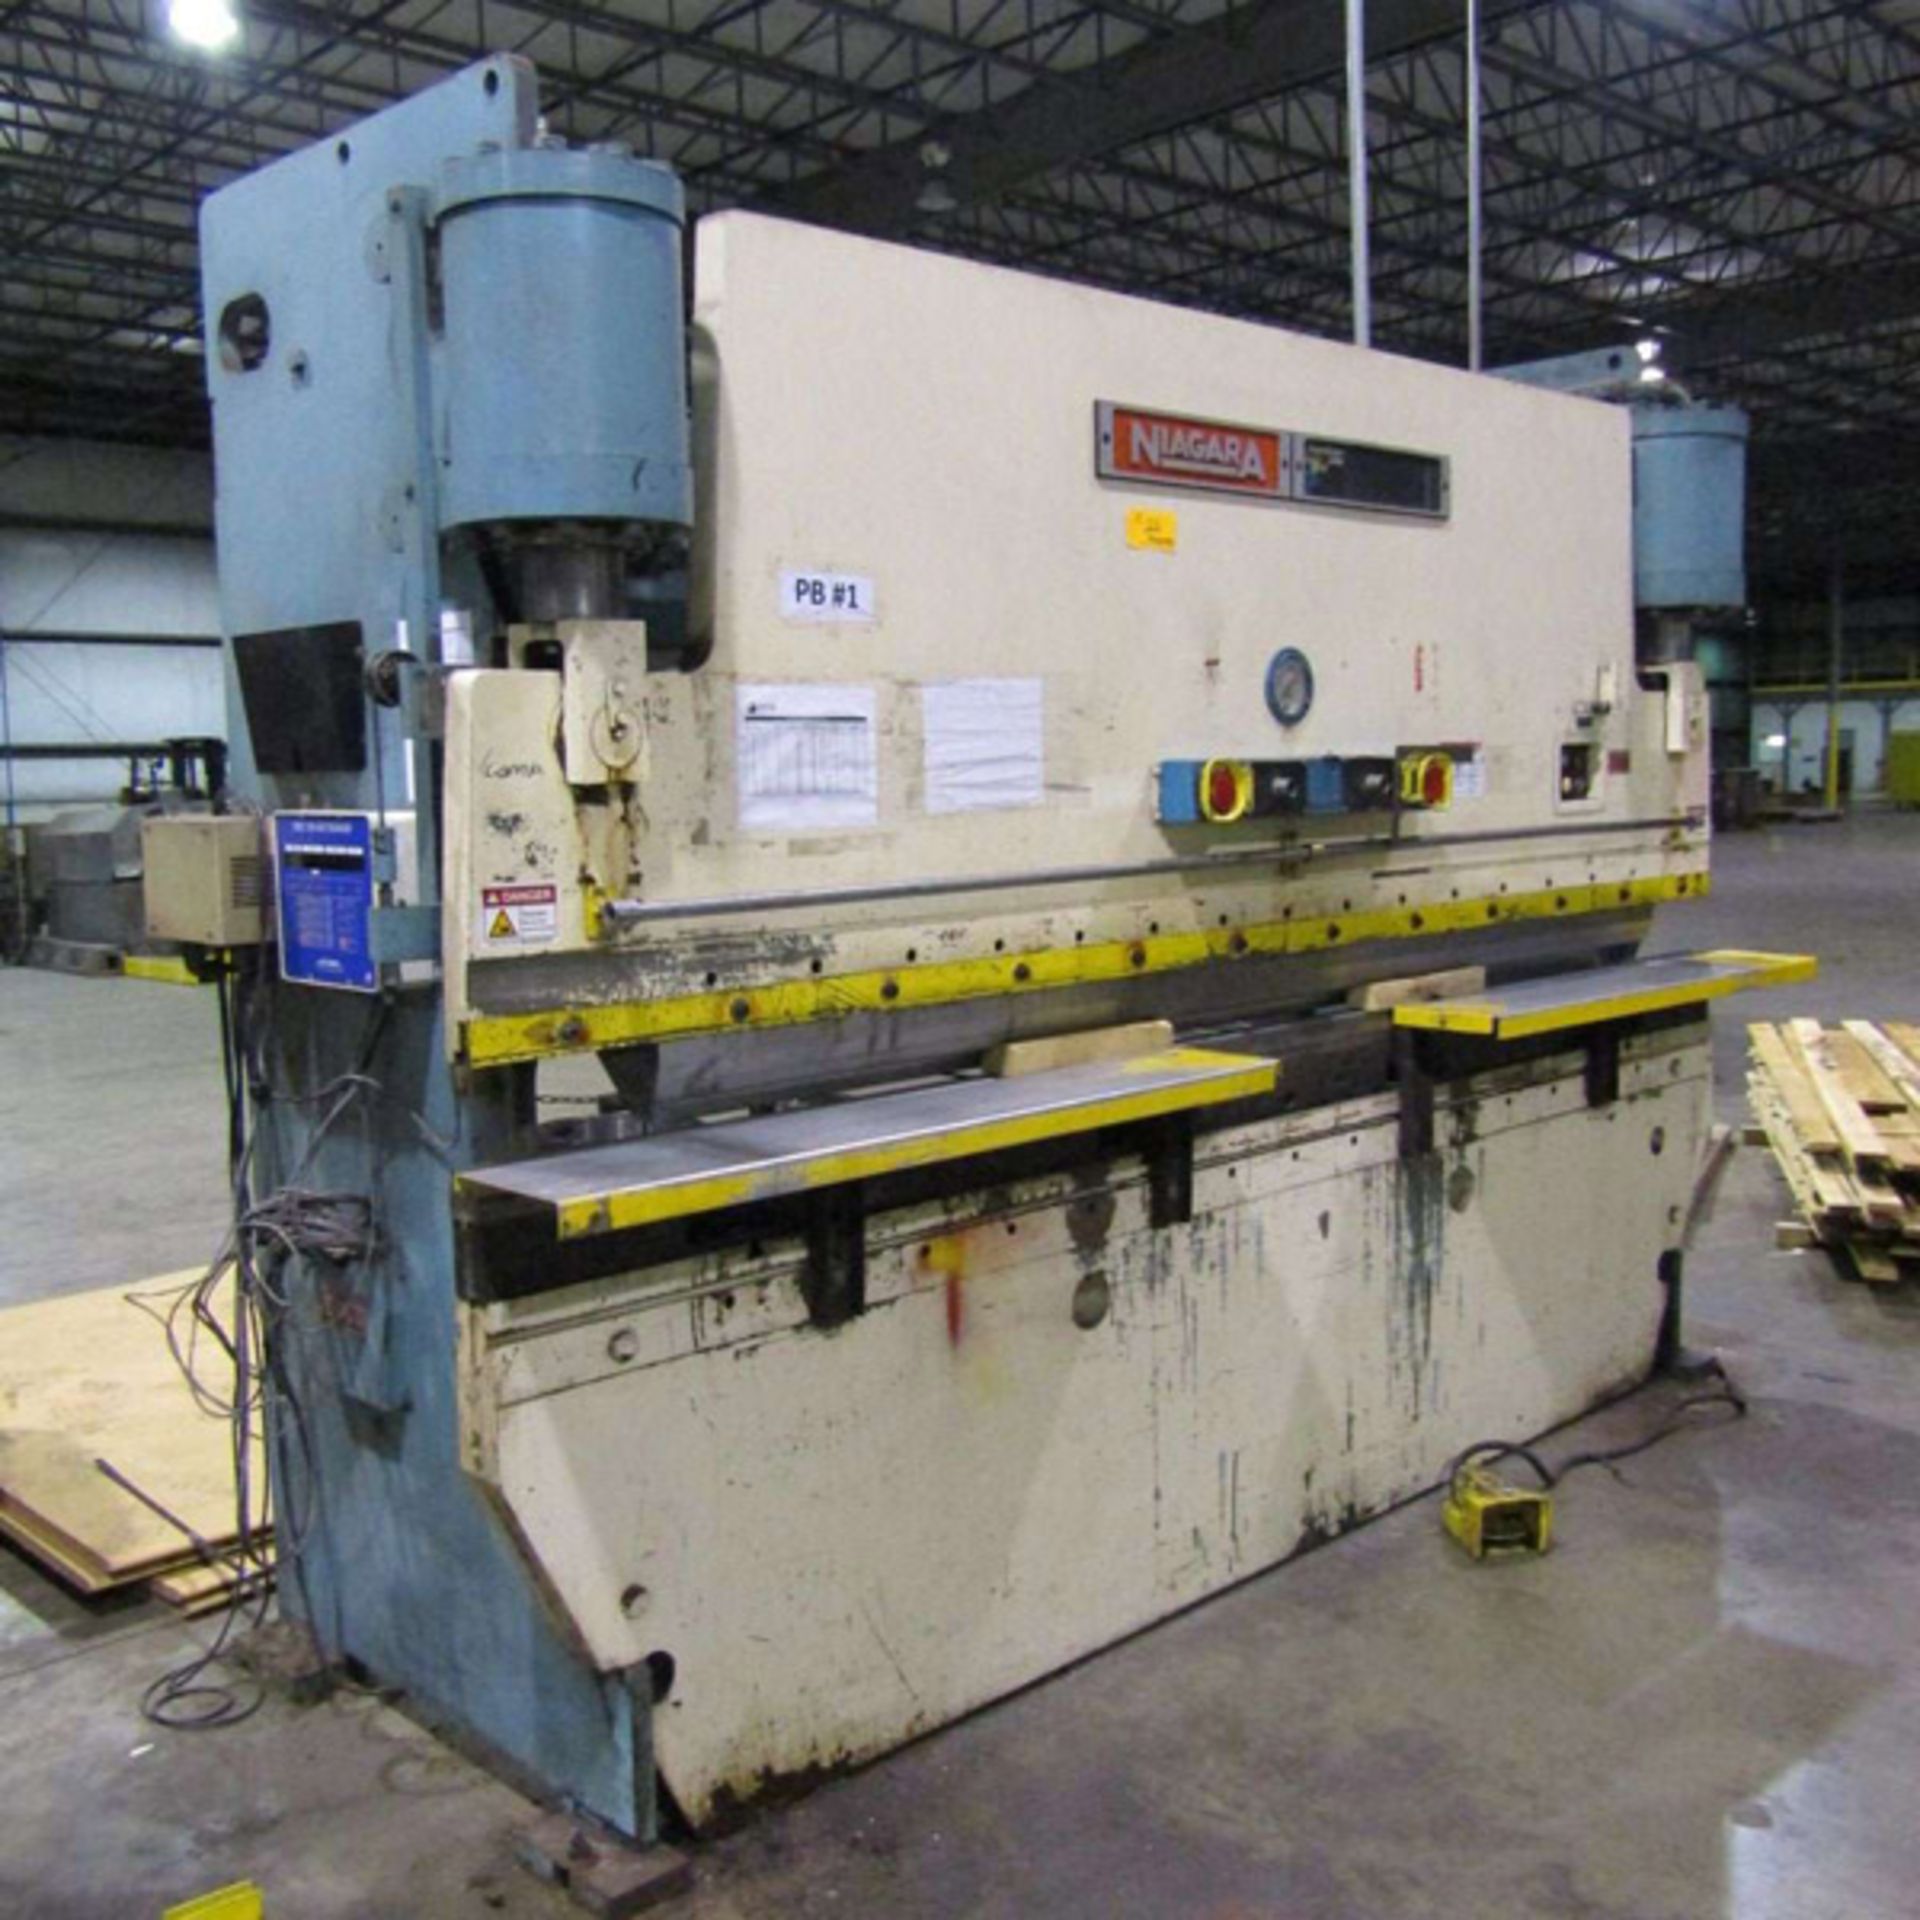 Niagara CNC Hyd. Press Brake, 135-Ton x 12' - Located In Painesville, OH - 8419 - Image 2 of 11